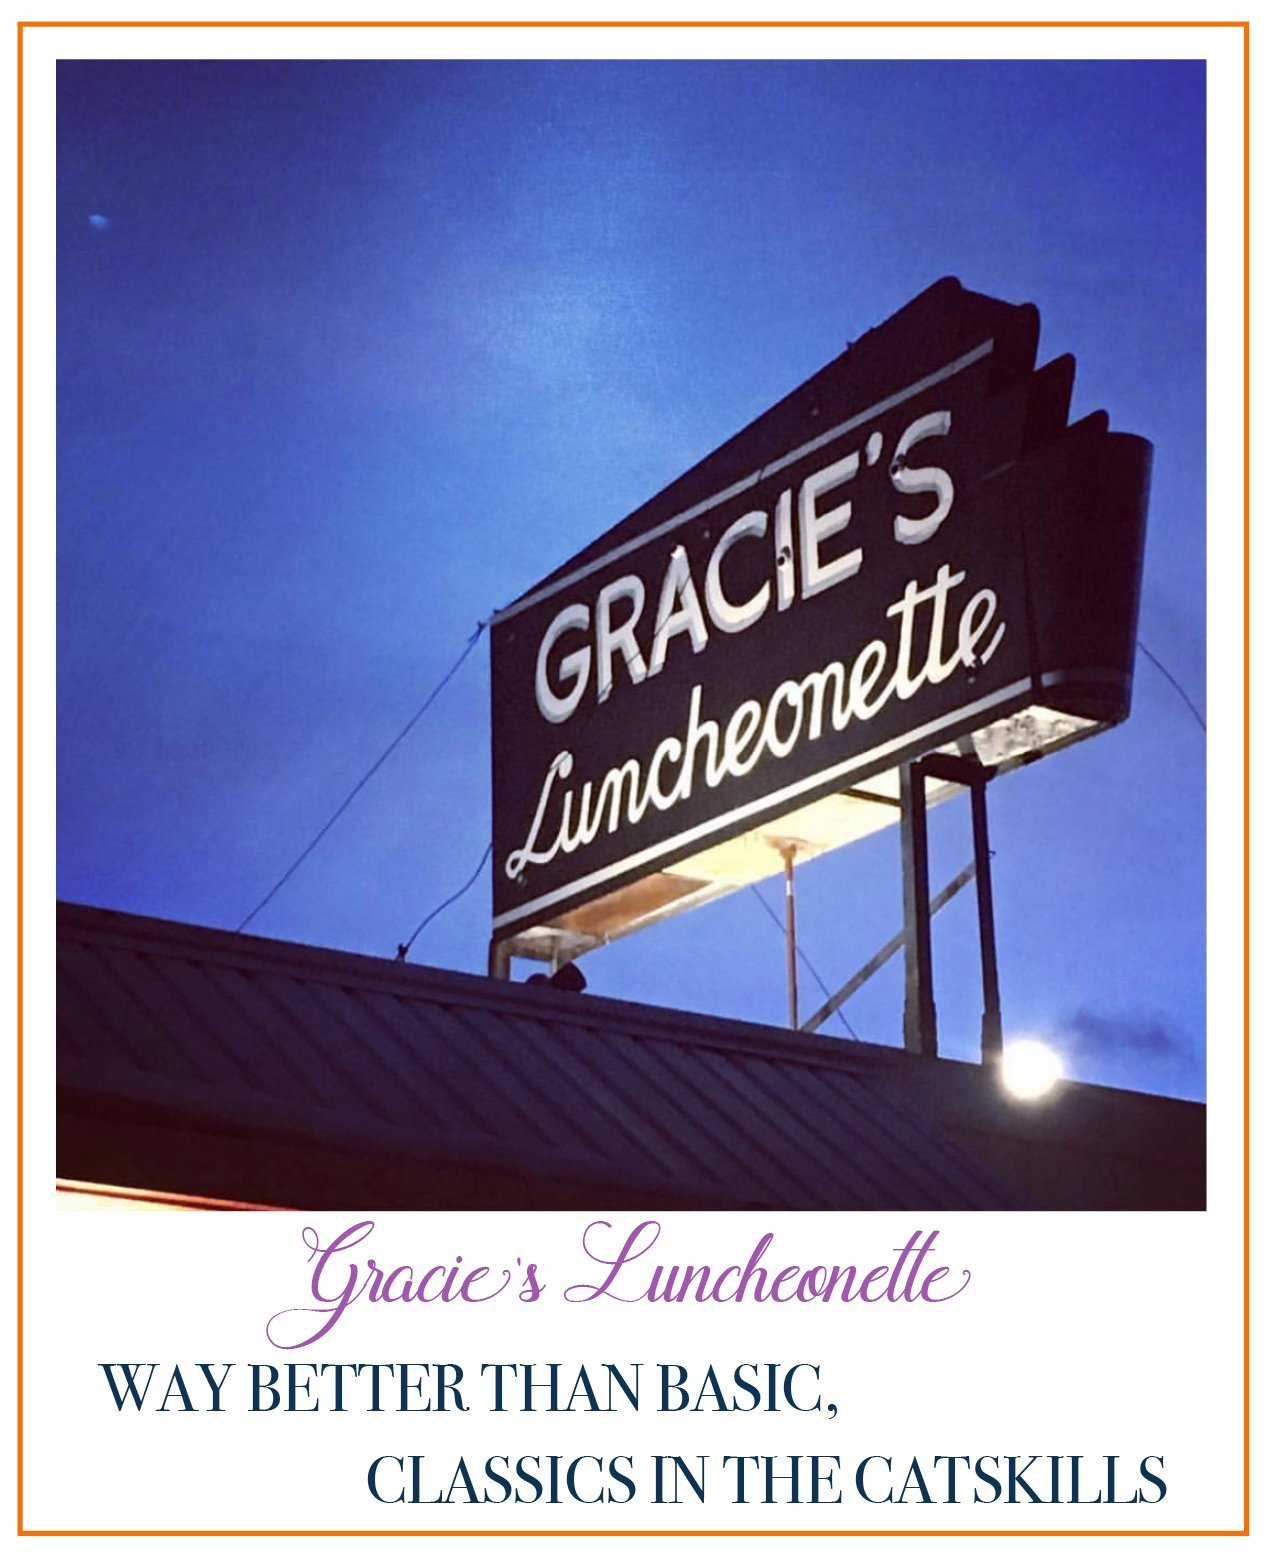 Gracie's Luncheonette | The Upstate Update photo